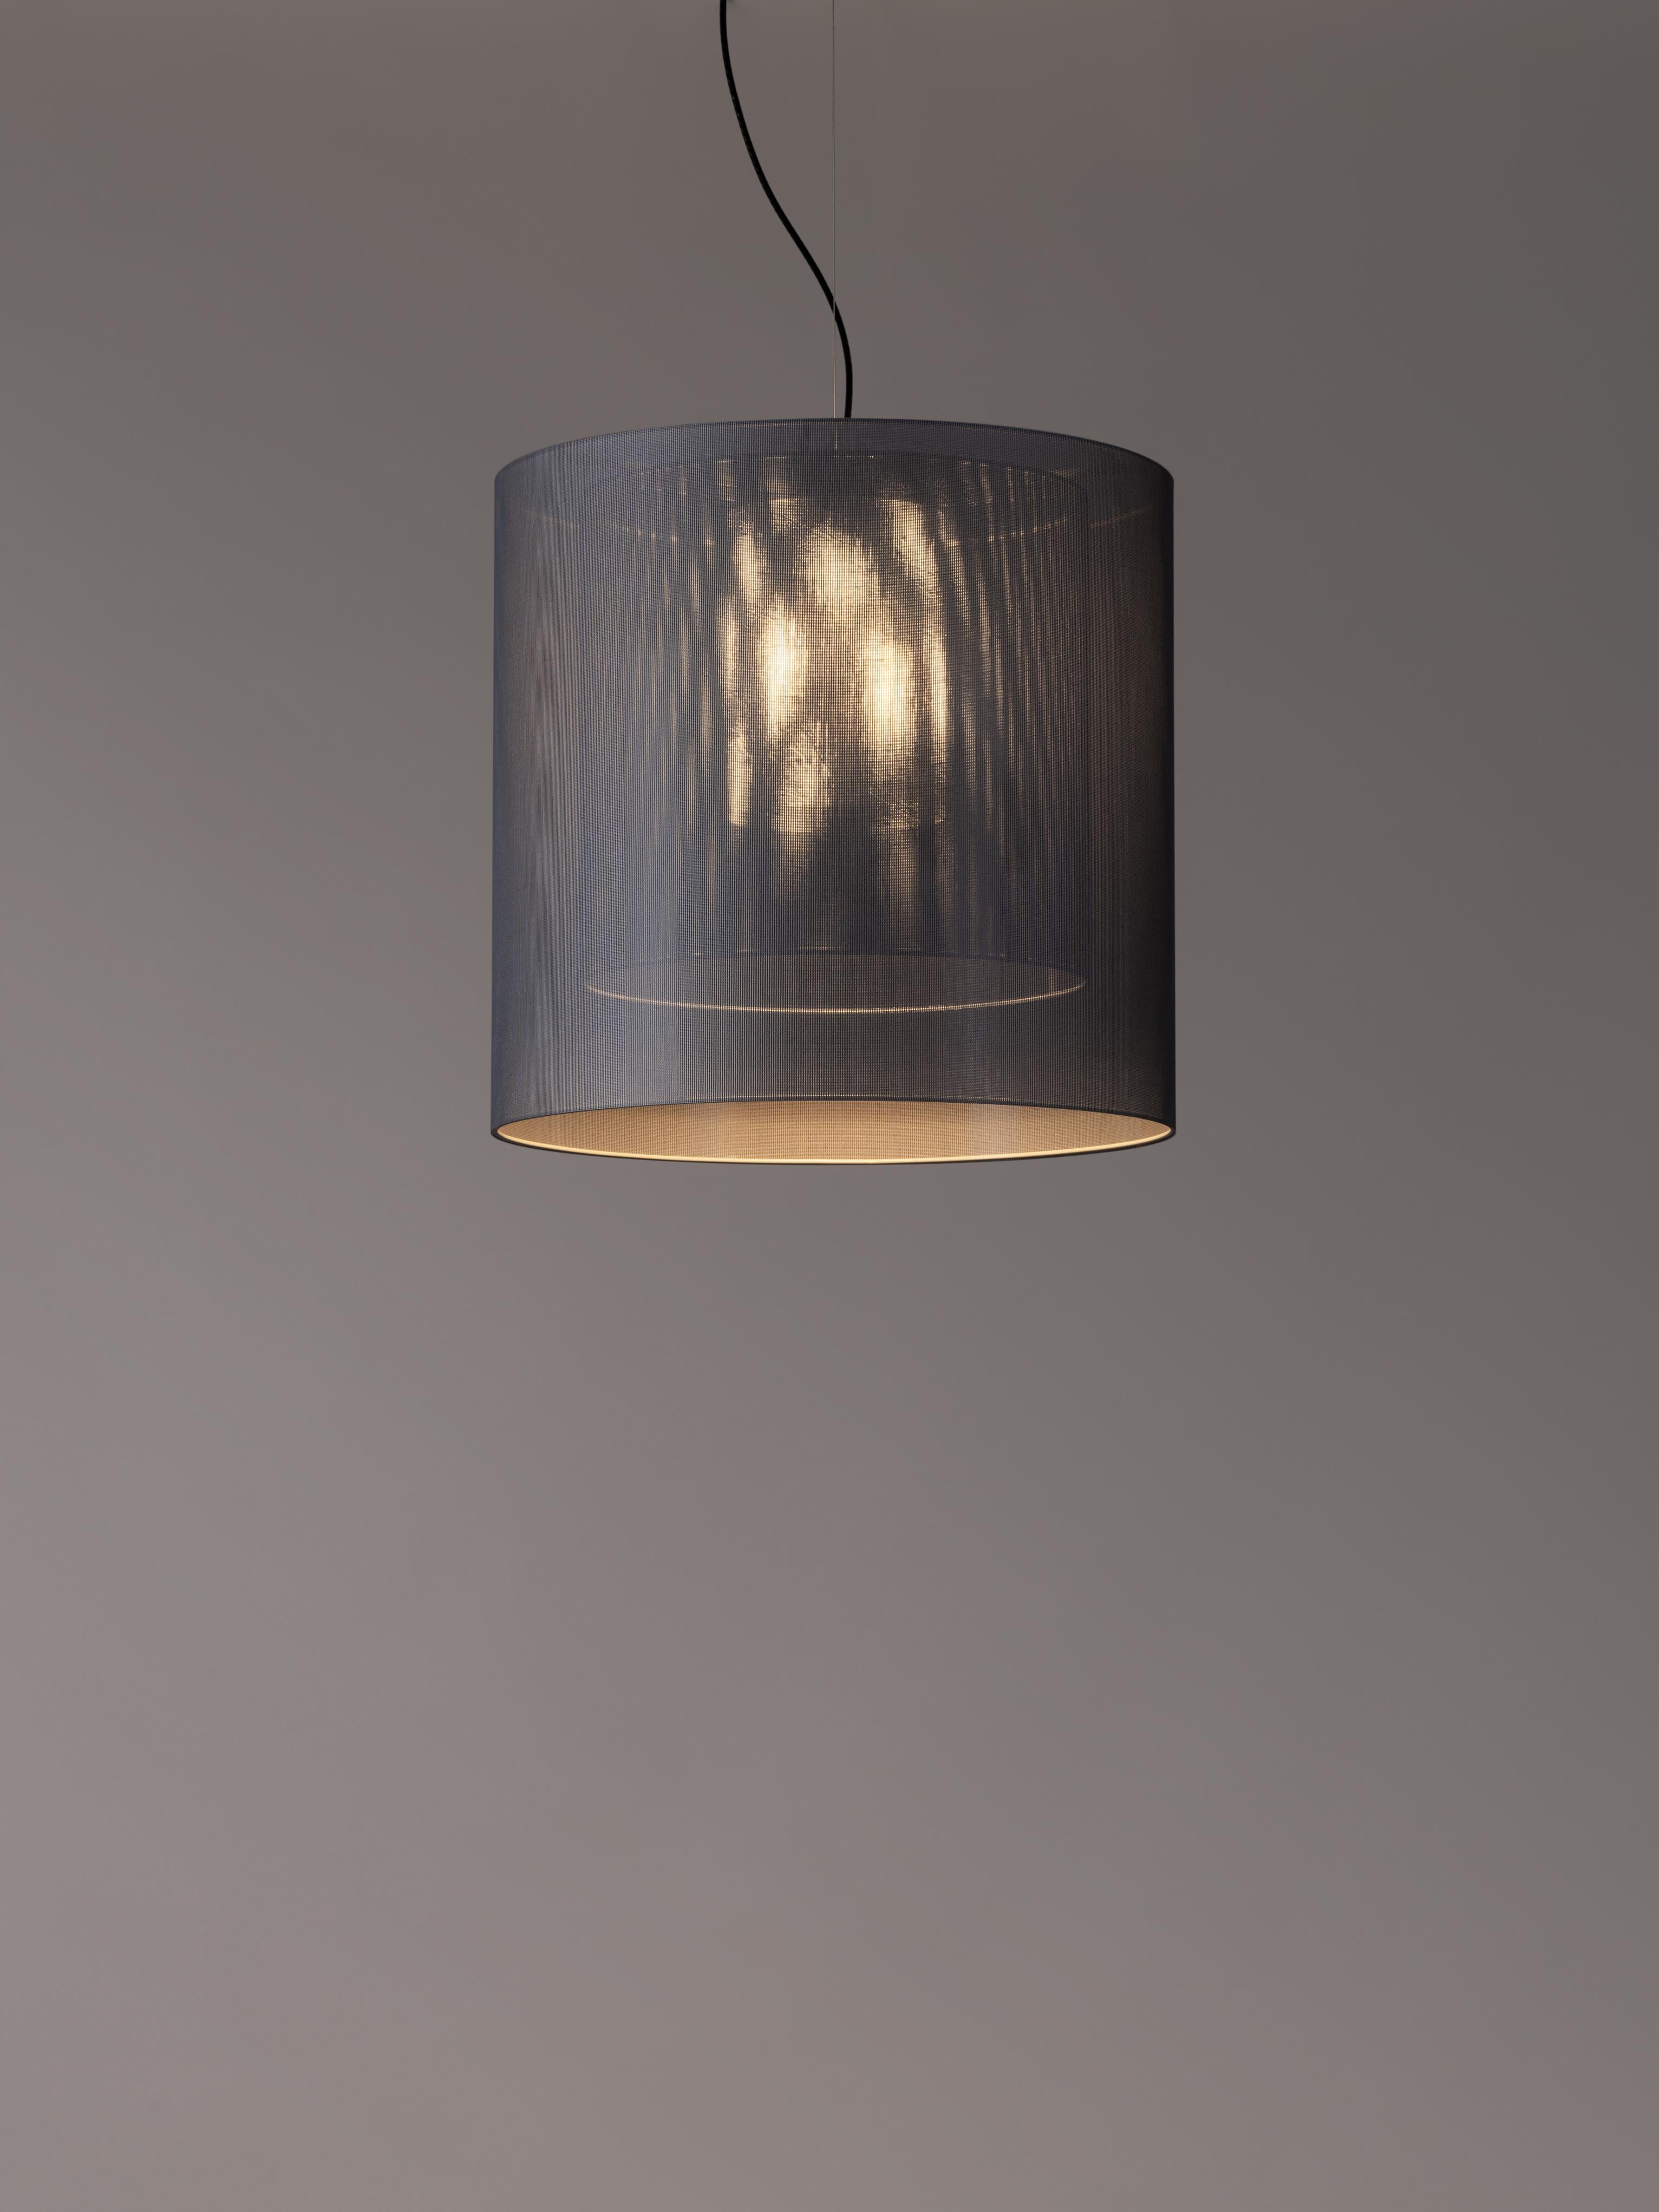 Grey and Black Moaré LM pendant lamp by Antoni Arola
Dimensions: D 62 x H 60 cm
Materials: Metal, polyester.
Available in other colors and sizes.

Moaré’s multiple combinations of formats and colours make it highly versatile. The series takes